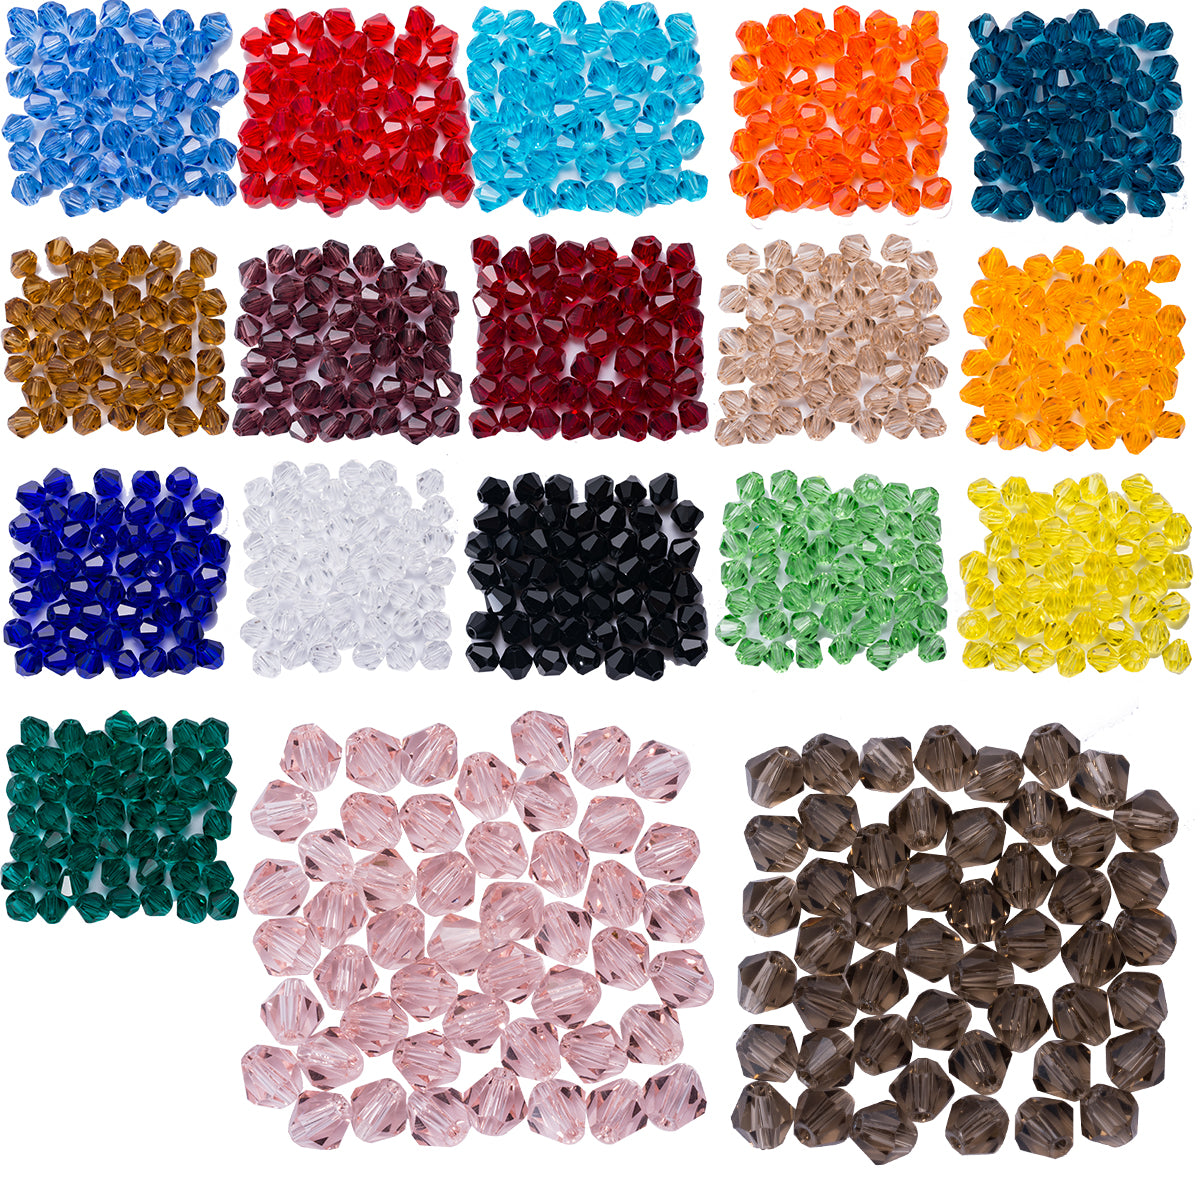 6mm Bicone Shaped Crystal Faceted Beads (900 pcs)